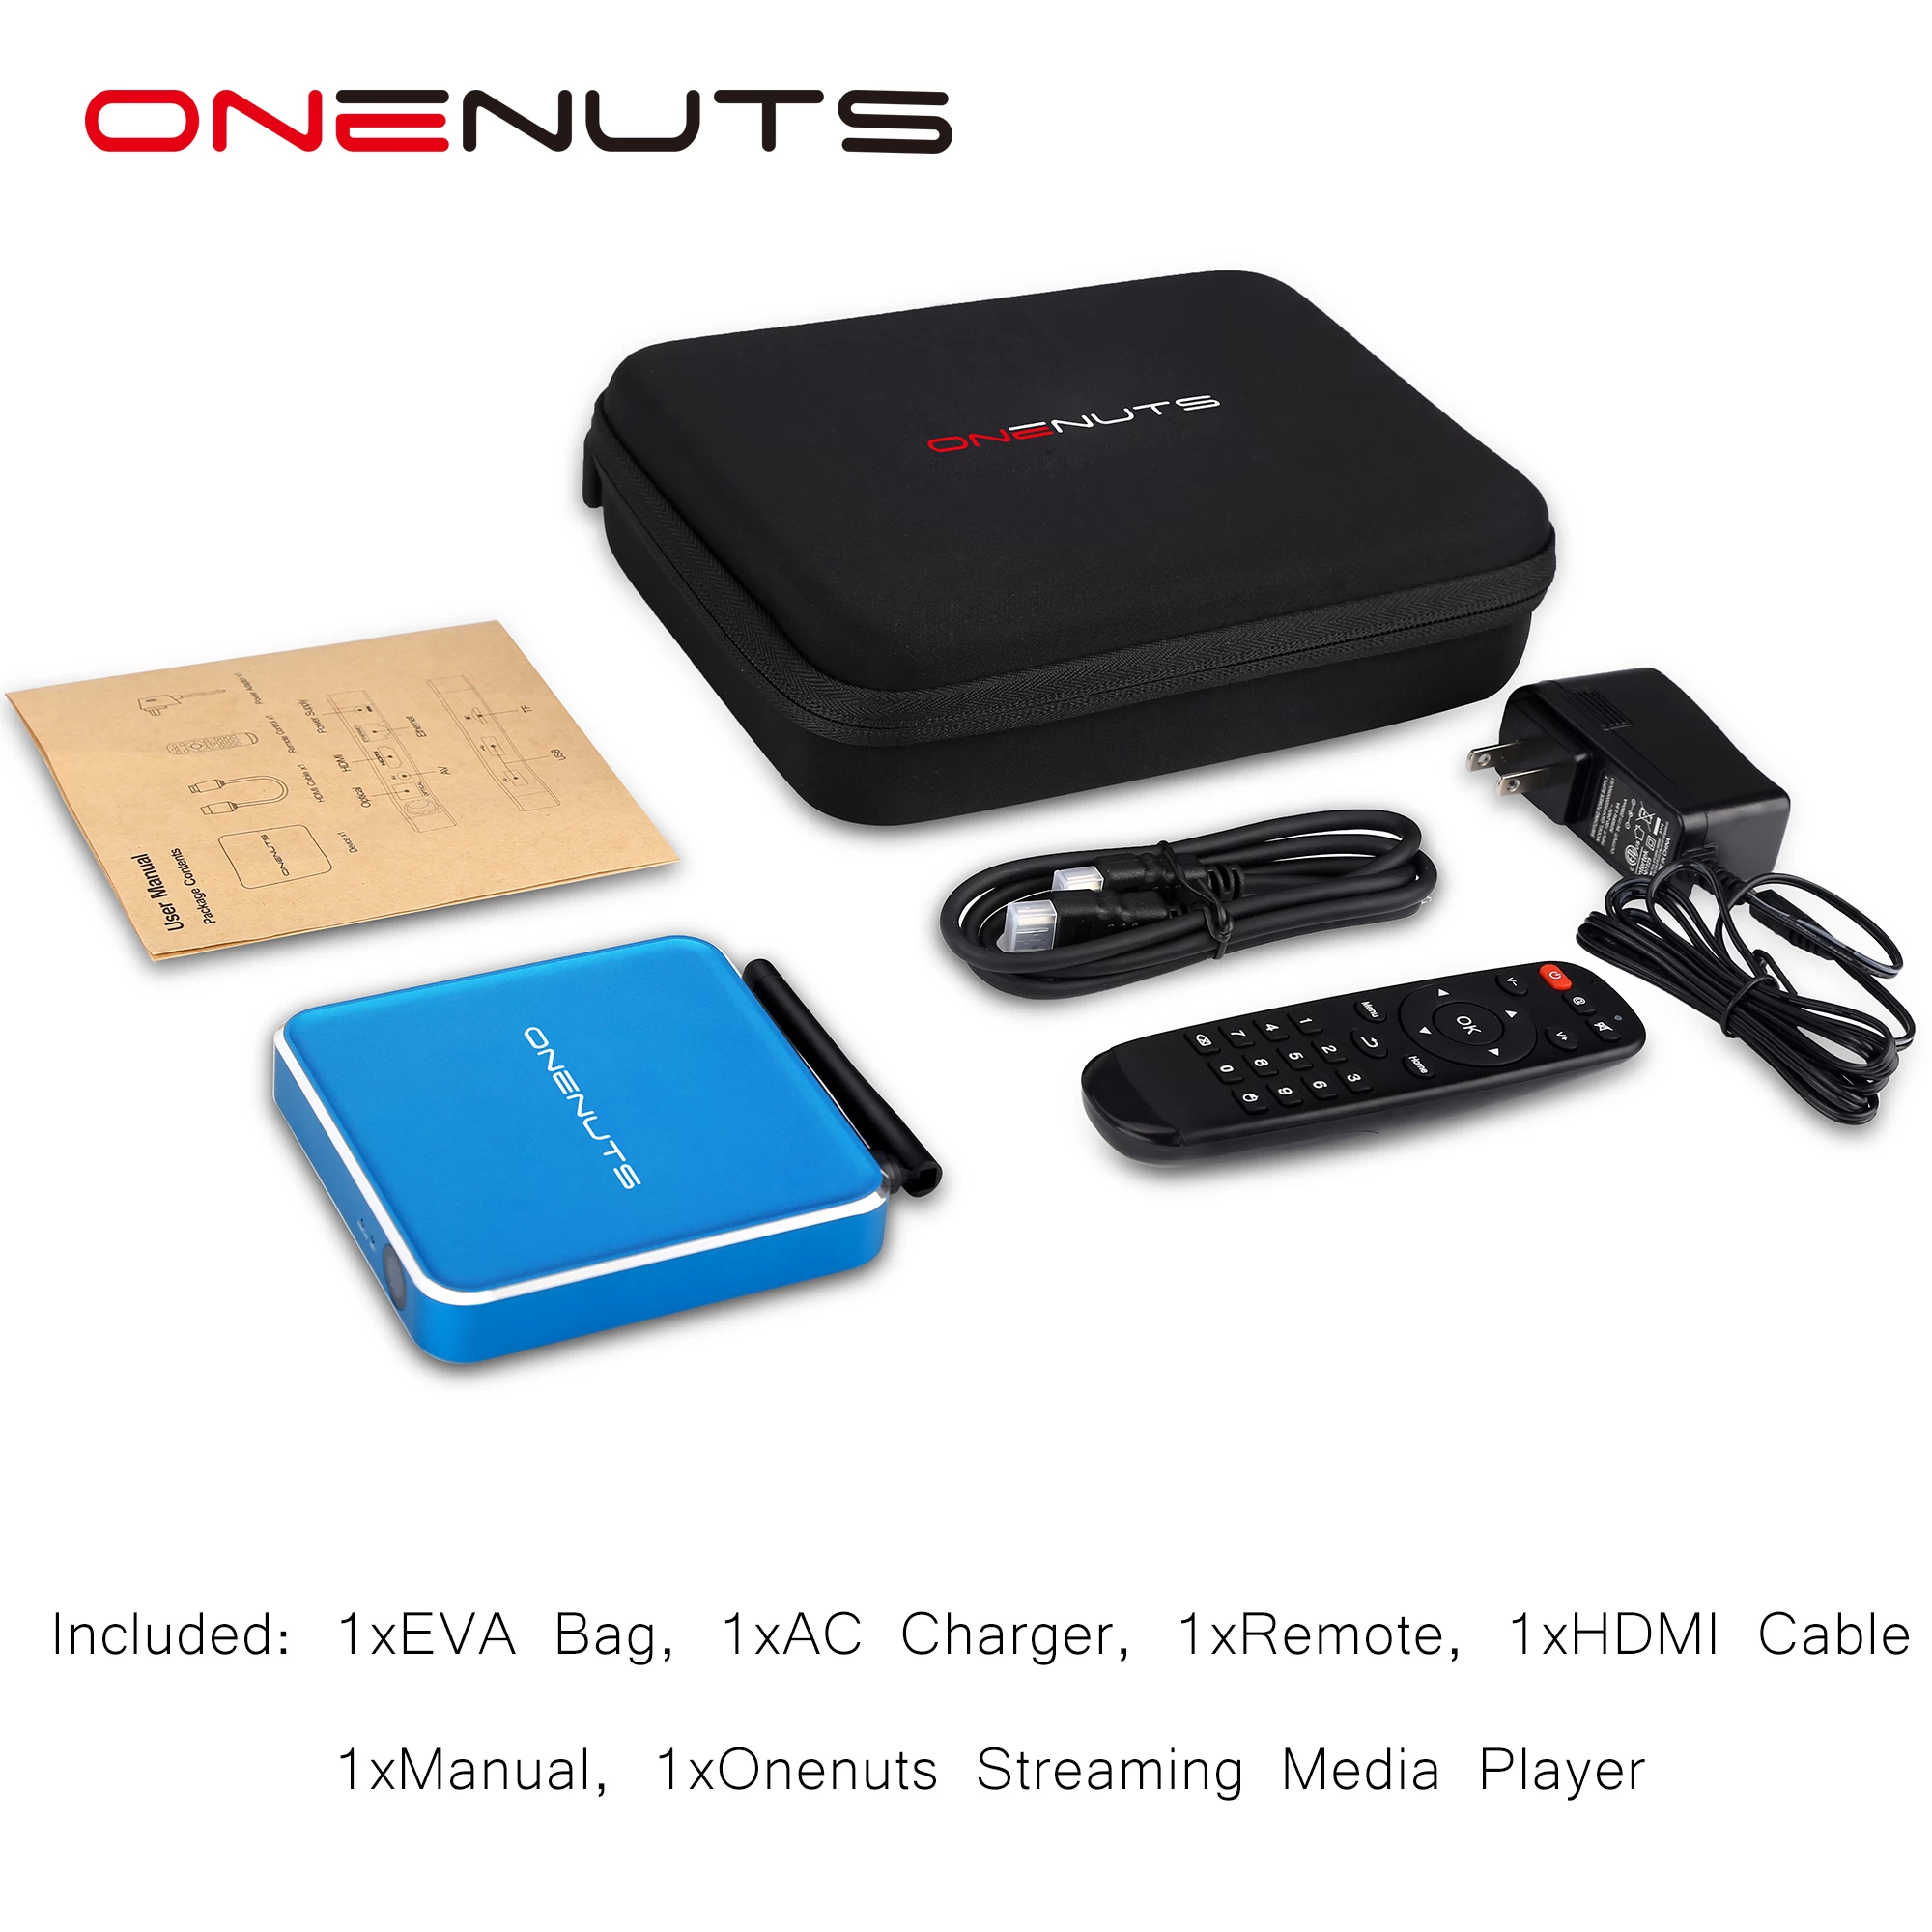 Android TV BOX with 3G/4G SIM Card slot, Android TV BOX WCDMA 4G/3G Dongle, Best Android TV Box HDMI input